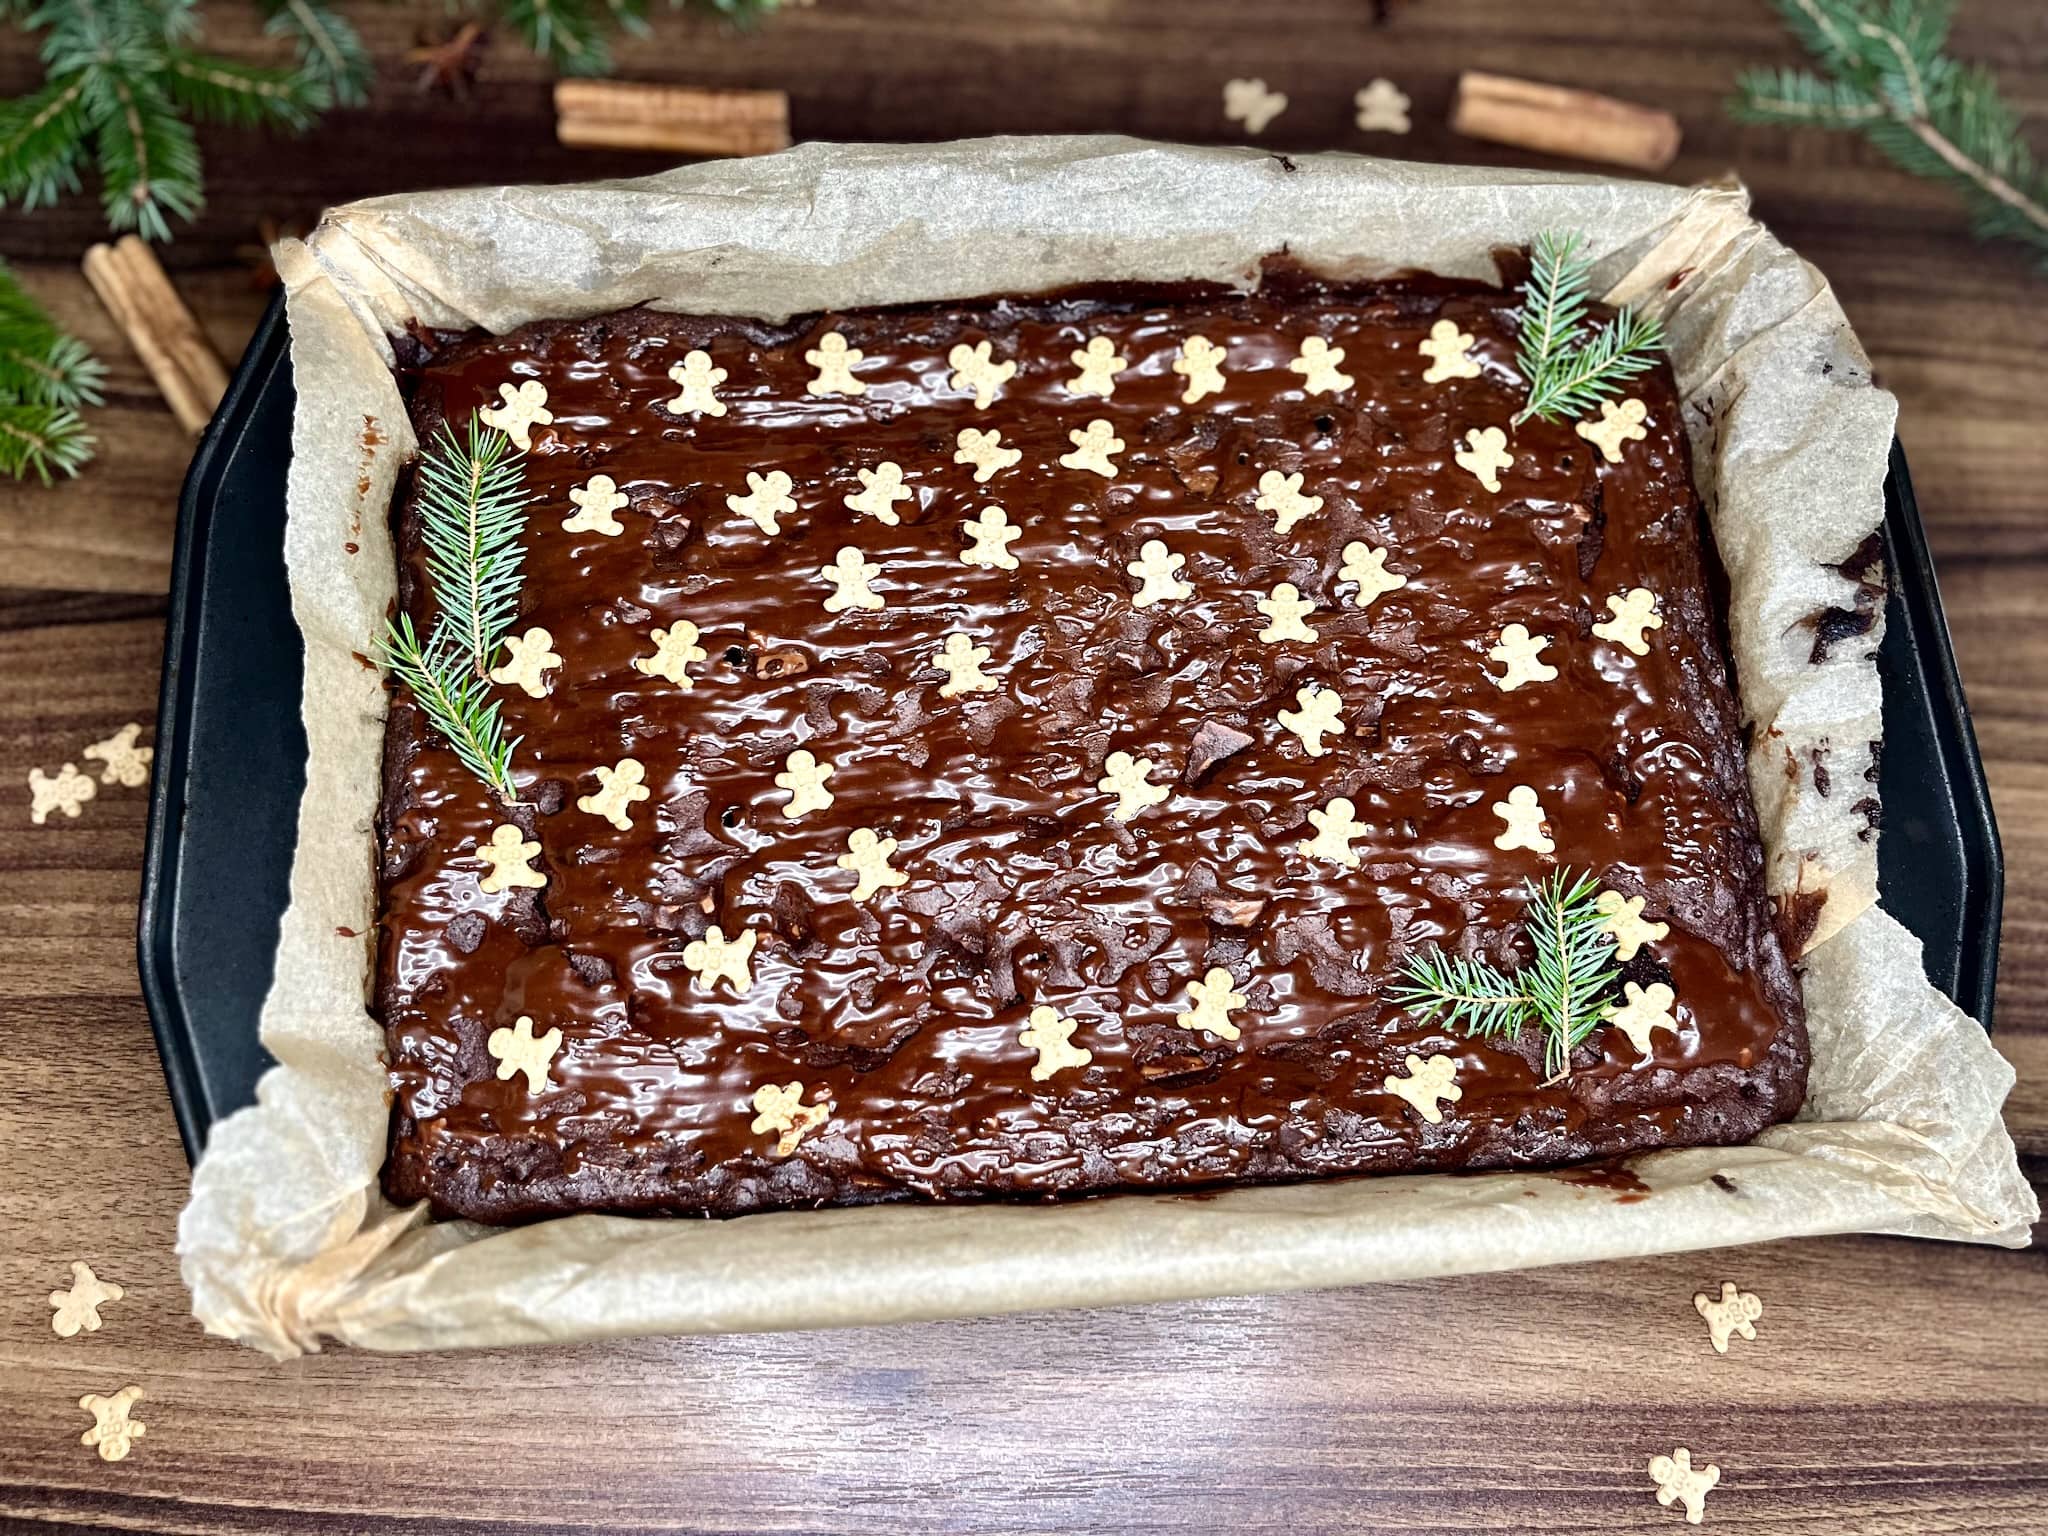 A beautifully decorated Gingerbread Brownie, still warm and gooey, basking in its baking tray